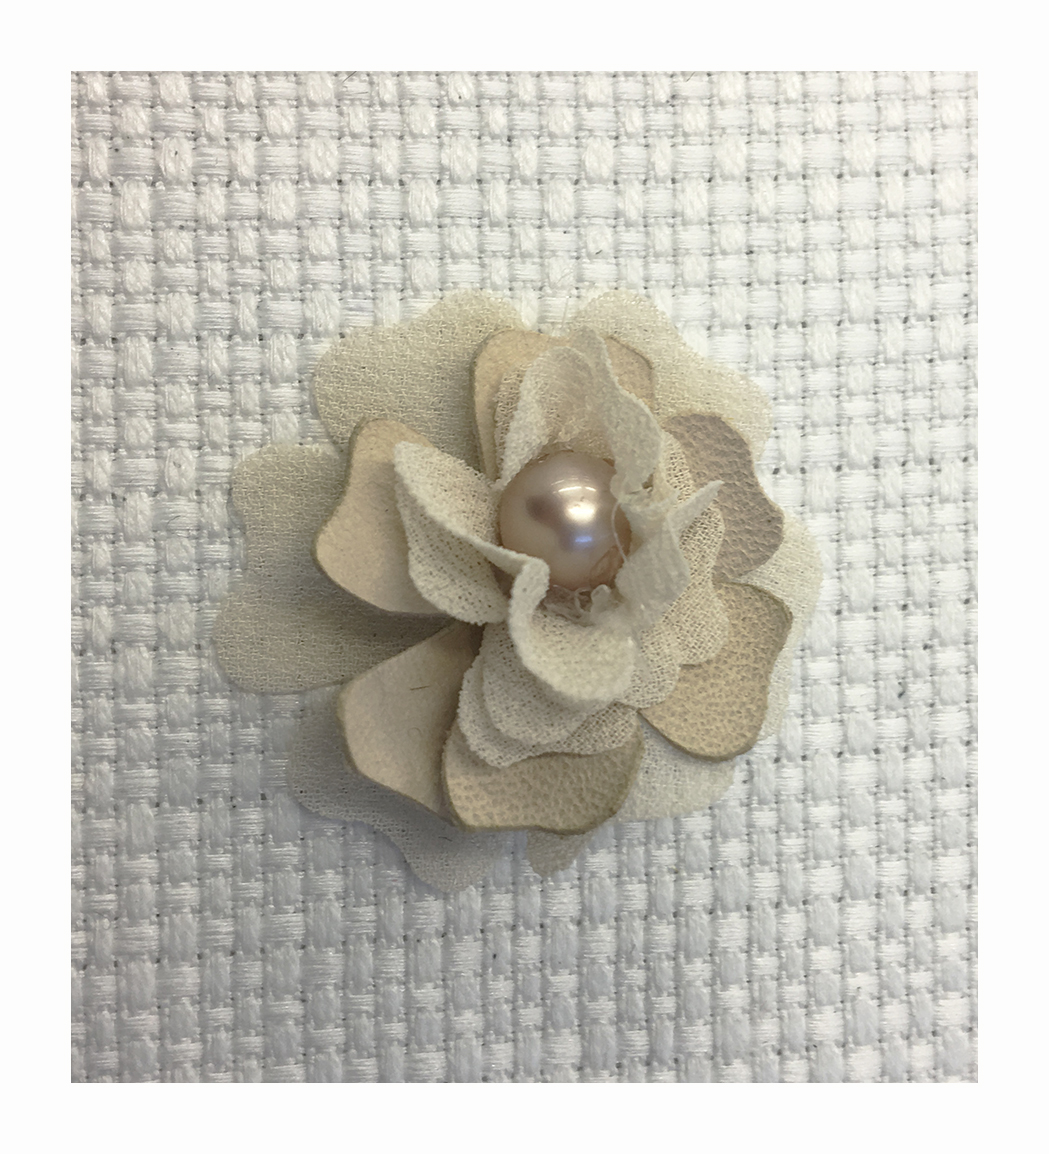 Flower made with georgette and cady petals laser treated and with a central pearl